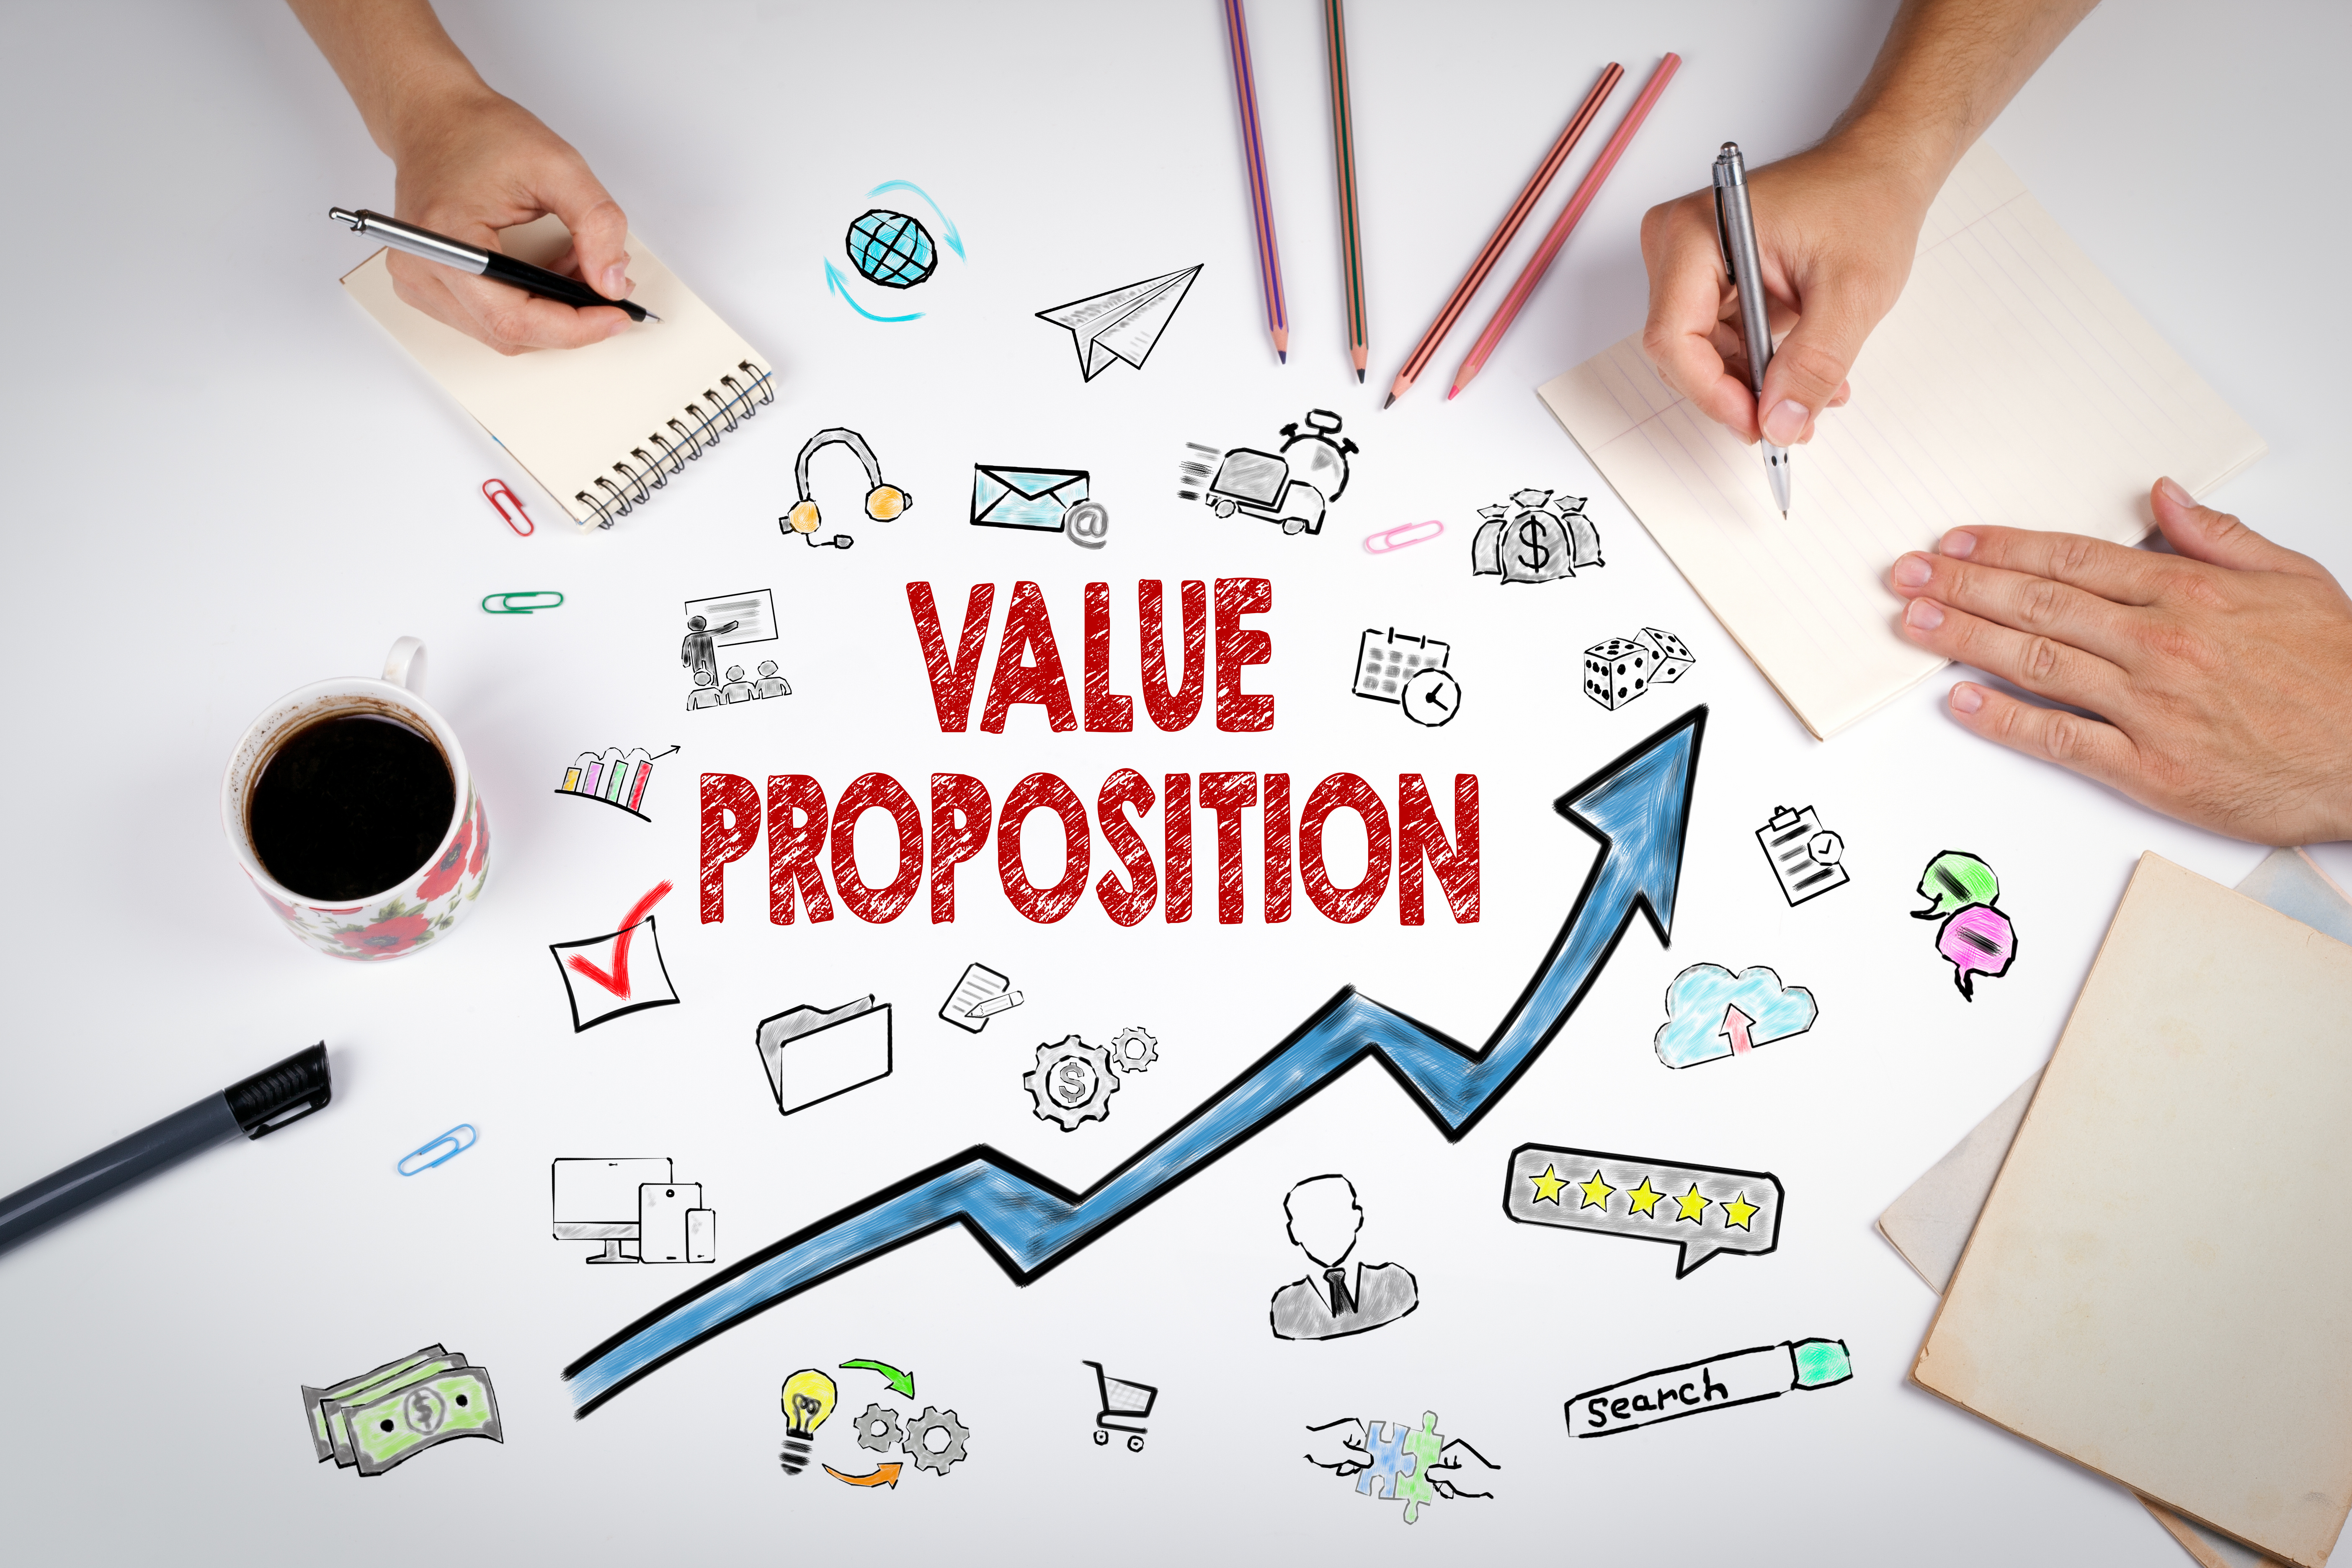 How to Write a Value Proposition